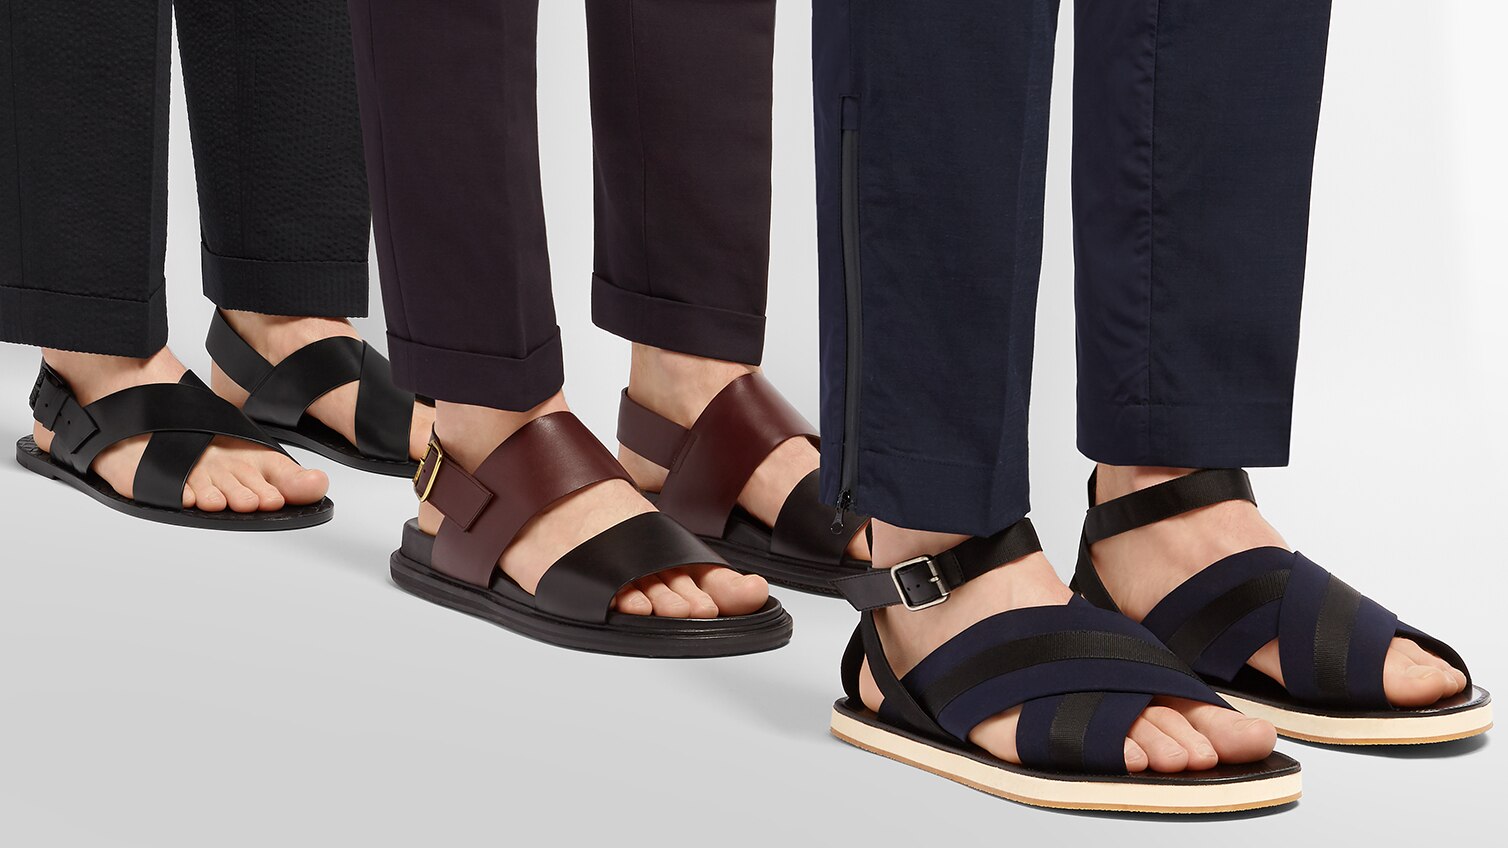 Are Your Feet Sandal-Ready? | The Journal | MR PORTER